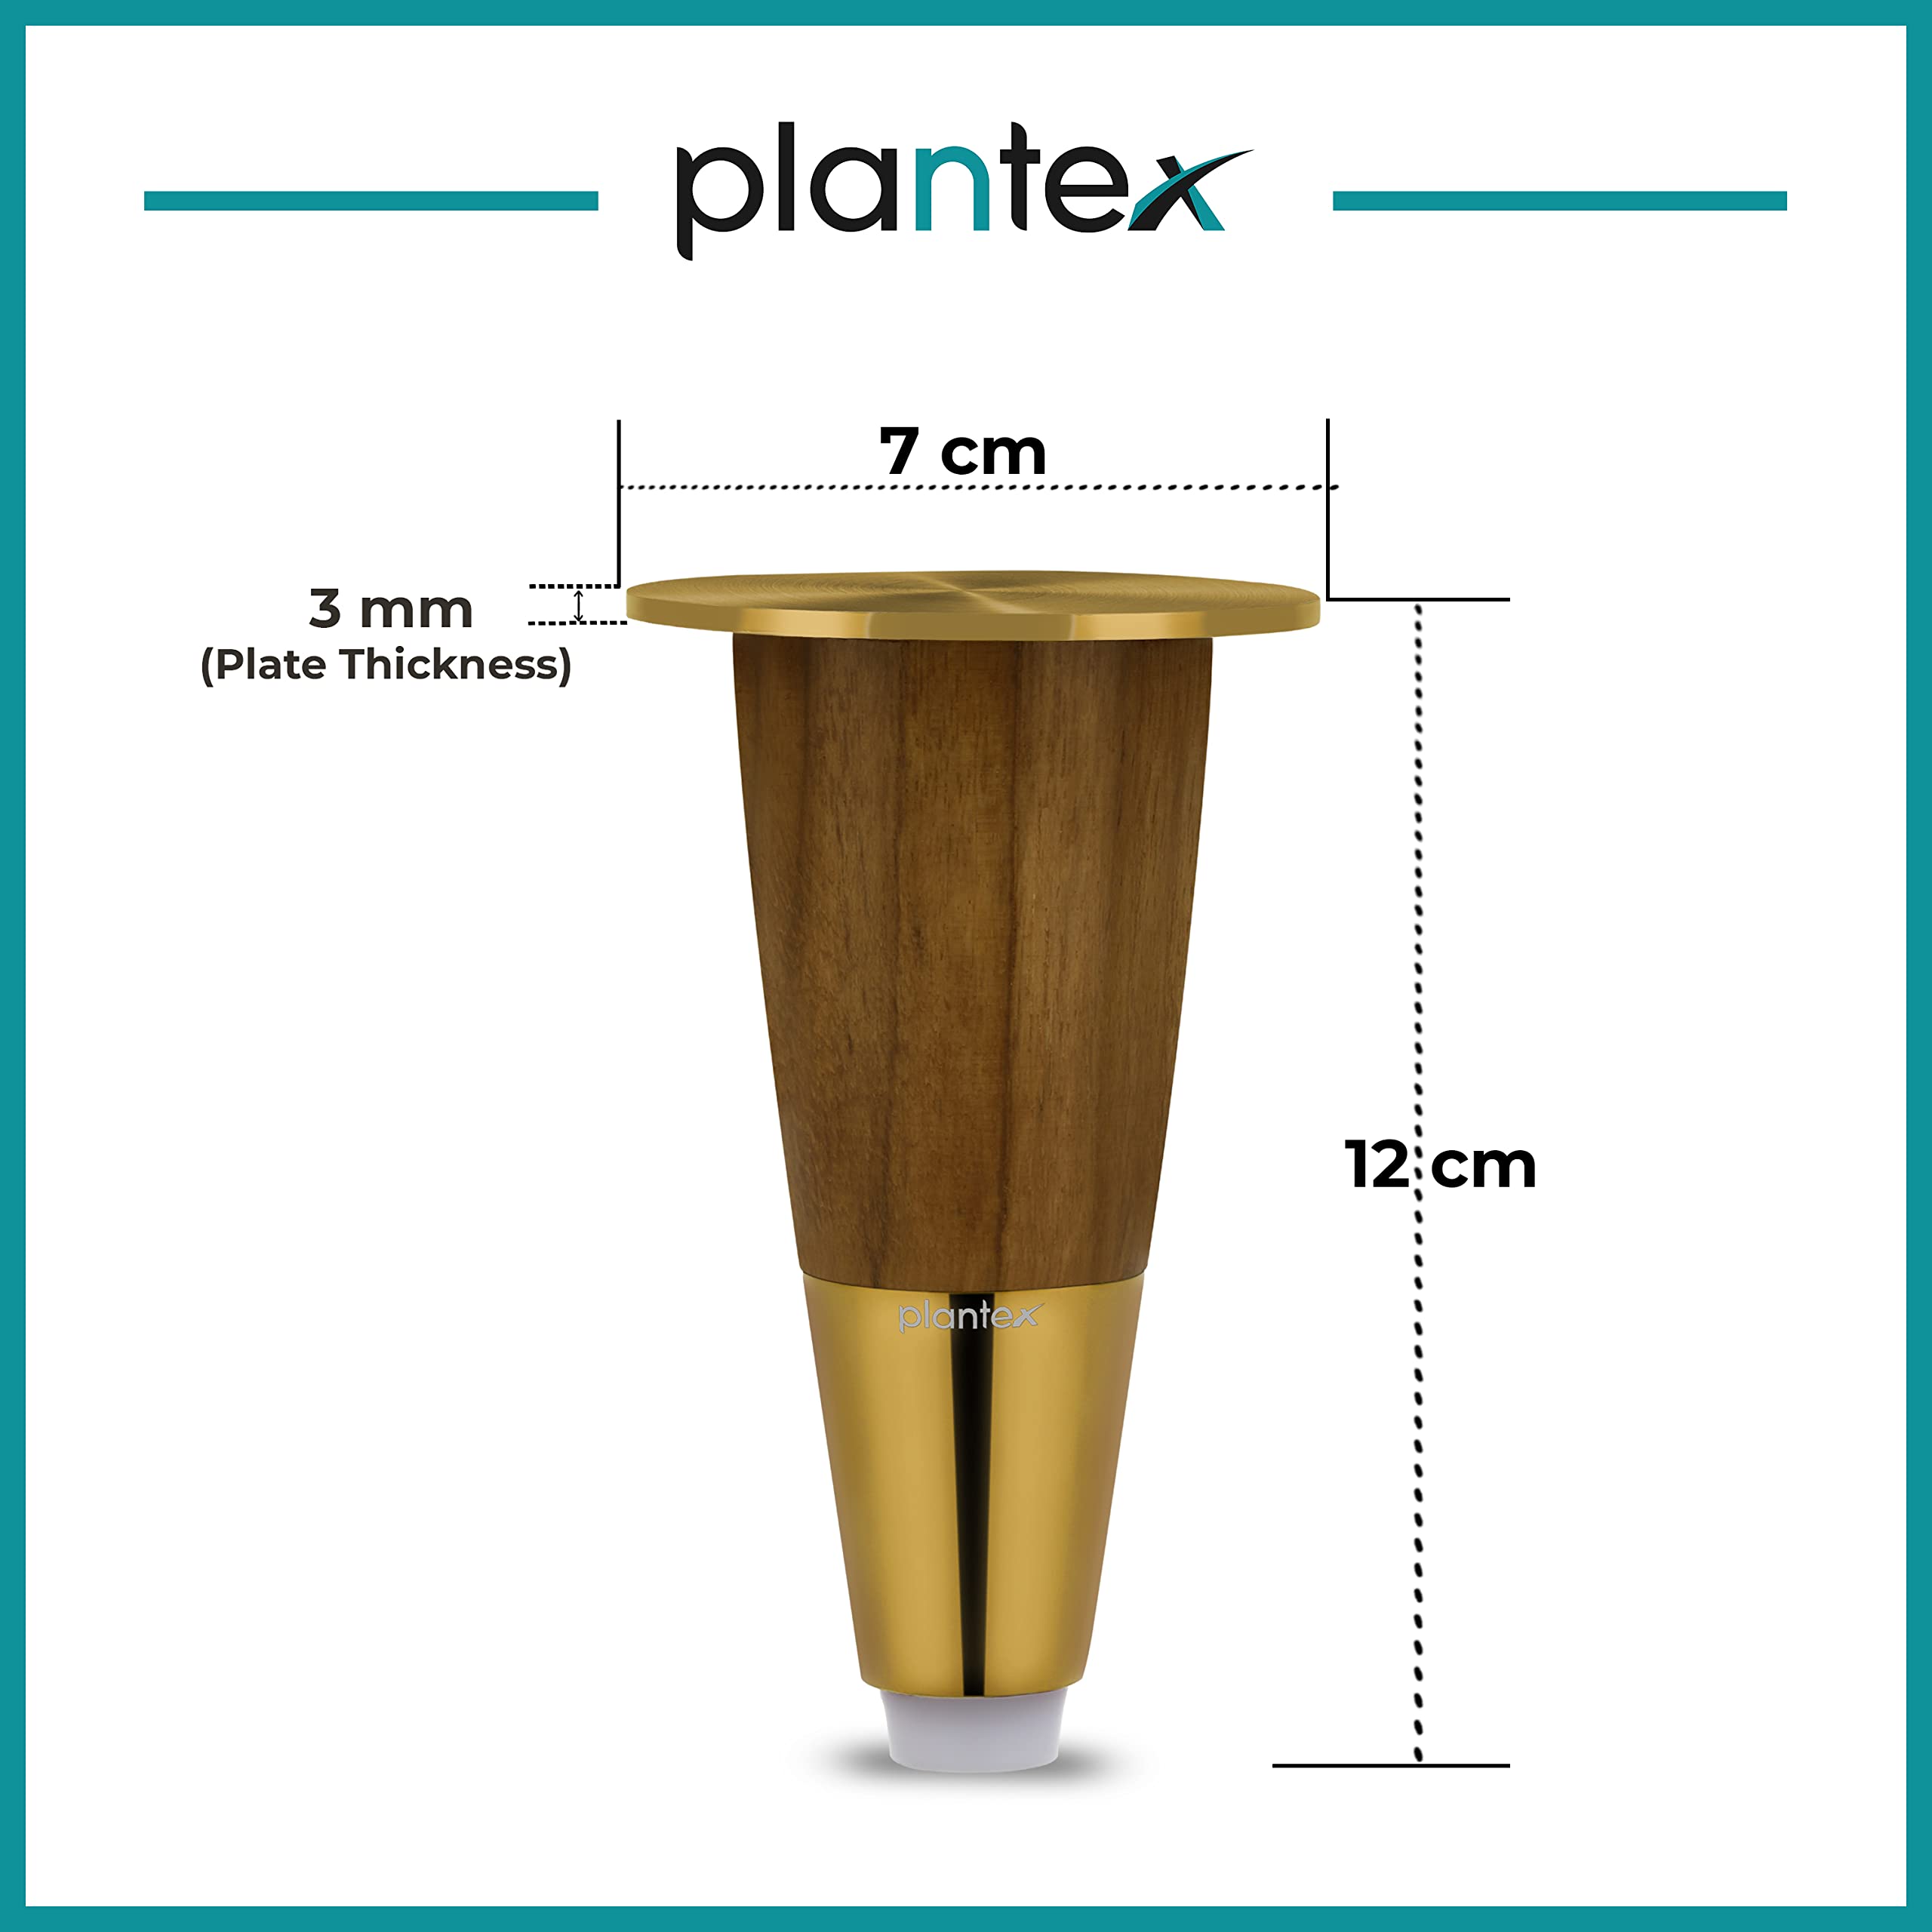 Plantex Stainless Steel and Wood 4 inch Sofa Leg/Bed Furniture Leg Pair for Home Furnitures (DTS-55-PVD Gold) – 6 Pcs